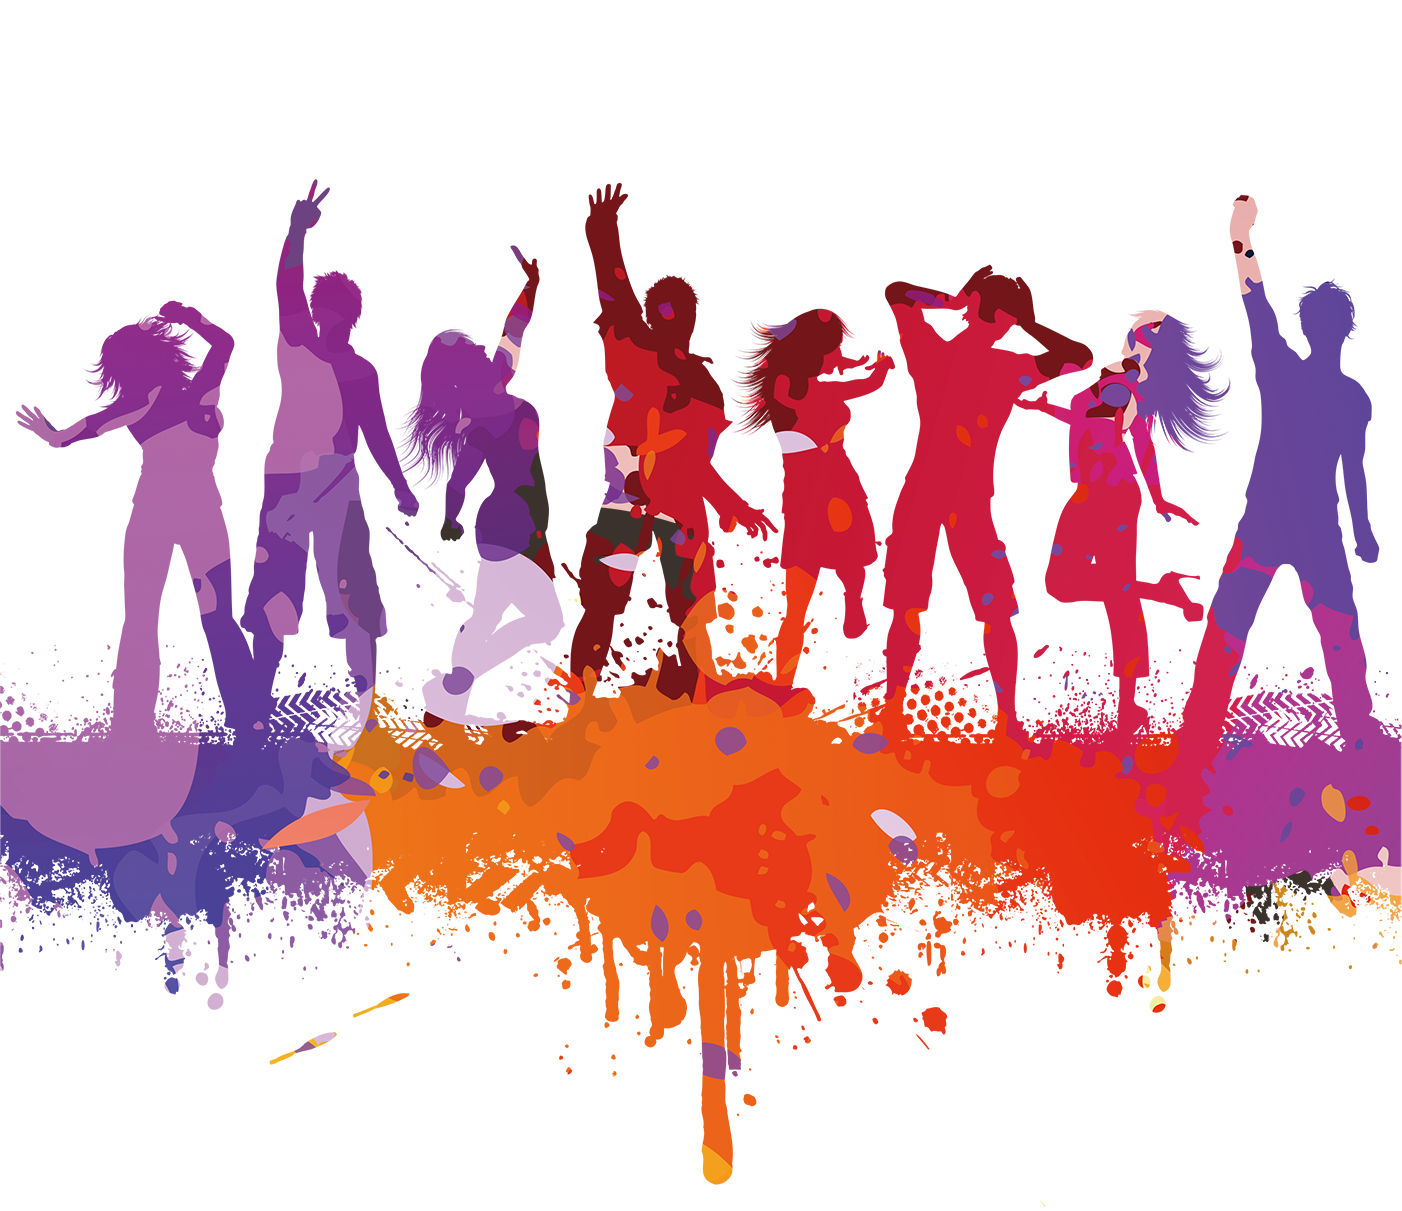 Dance Party Dance Party Silhouette Color Silhouettes Of Men And Women Png Download 1402 1211